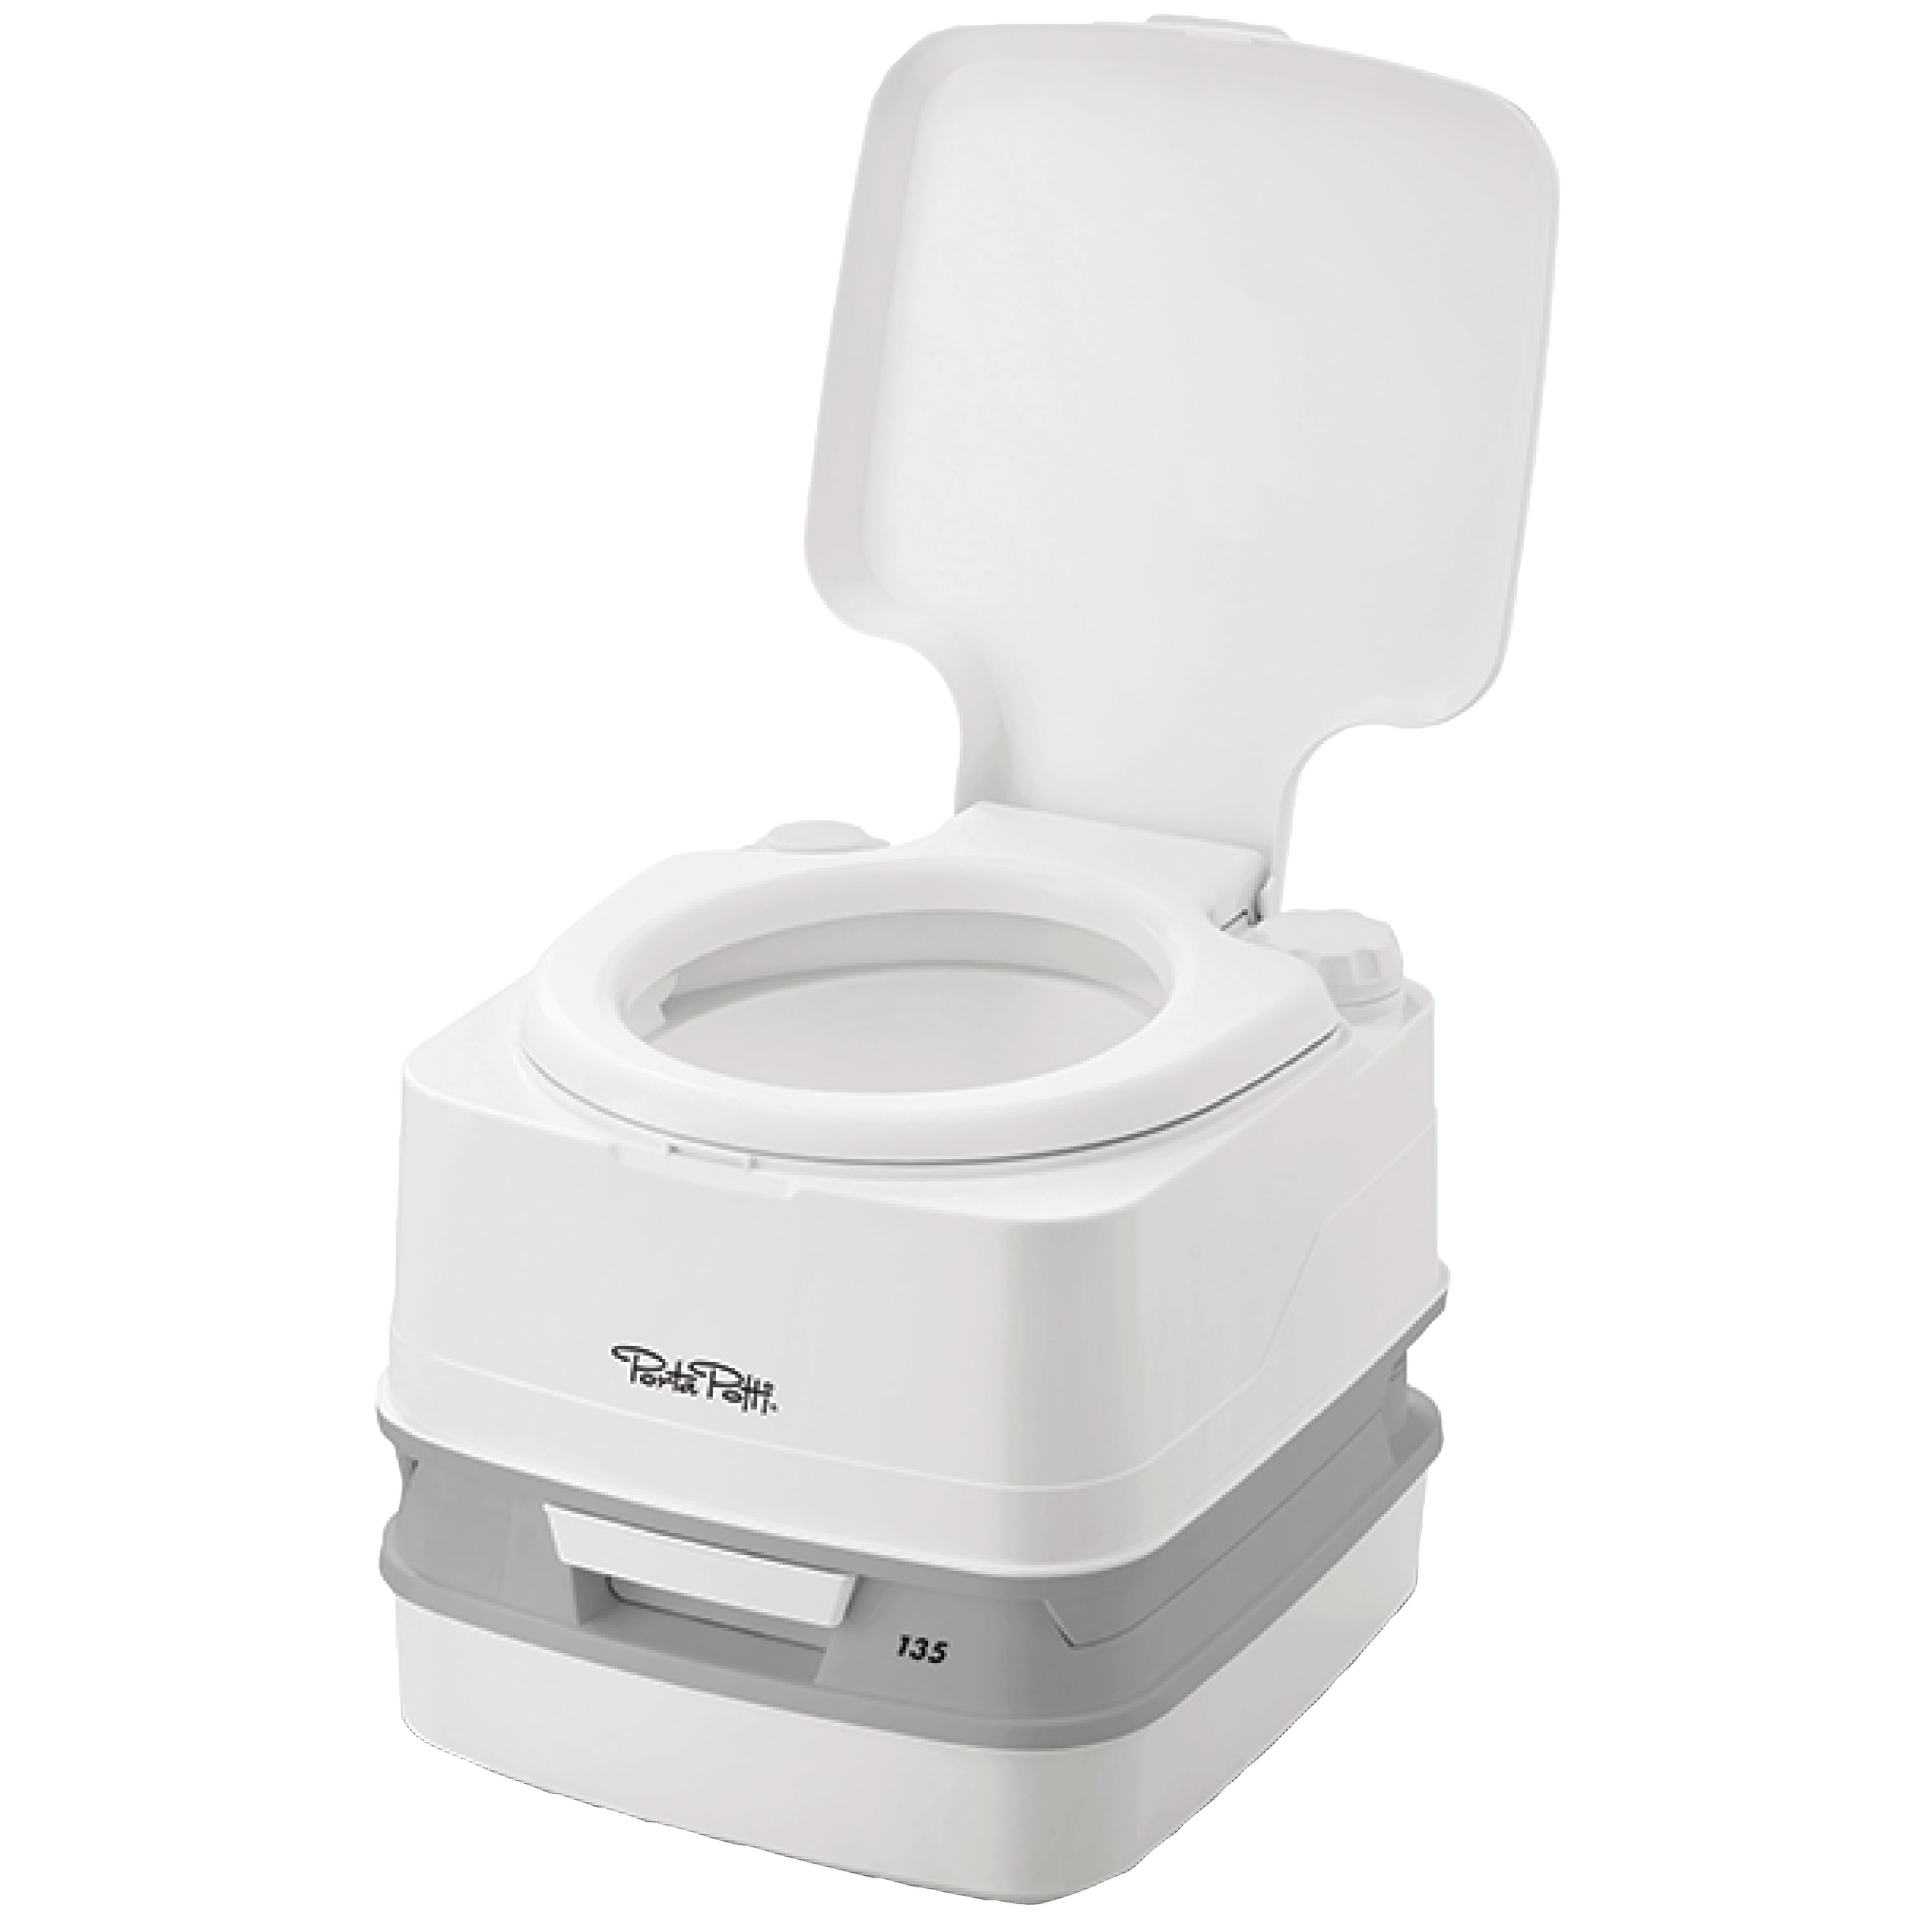 Boating And Other Recreational Activites Designed for Camping 5.3 gallon Camco Standard Portable Travel Toilet RV 41541 